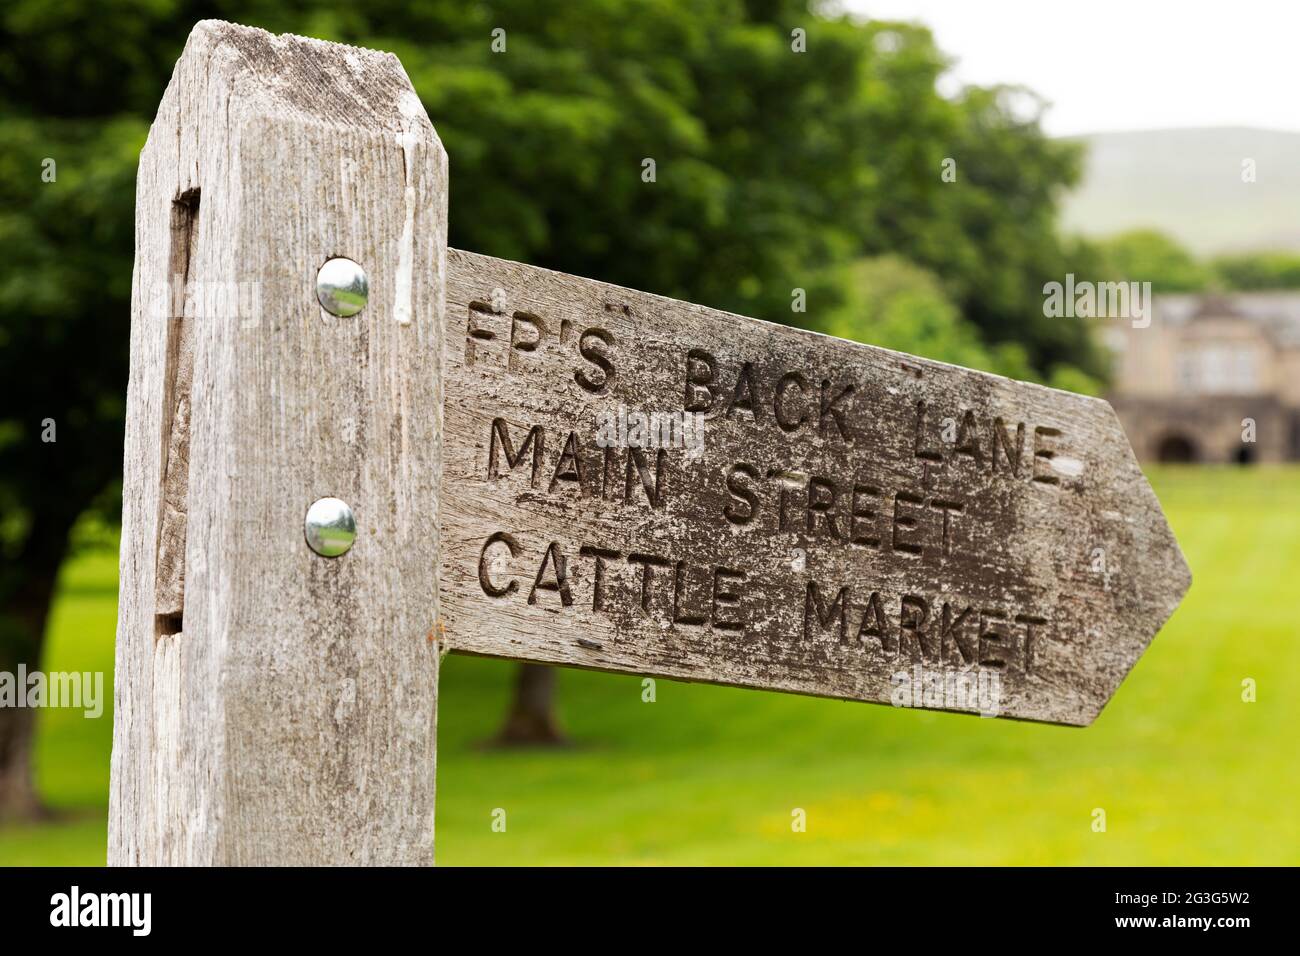 Sign for footpaths around the town of Sedbergh in Cumbria, England. Sedbergh is in the Yorkshire Dales National Park and the footpaths lead to Back La Stock Photo